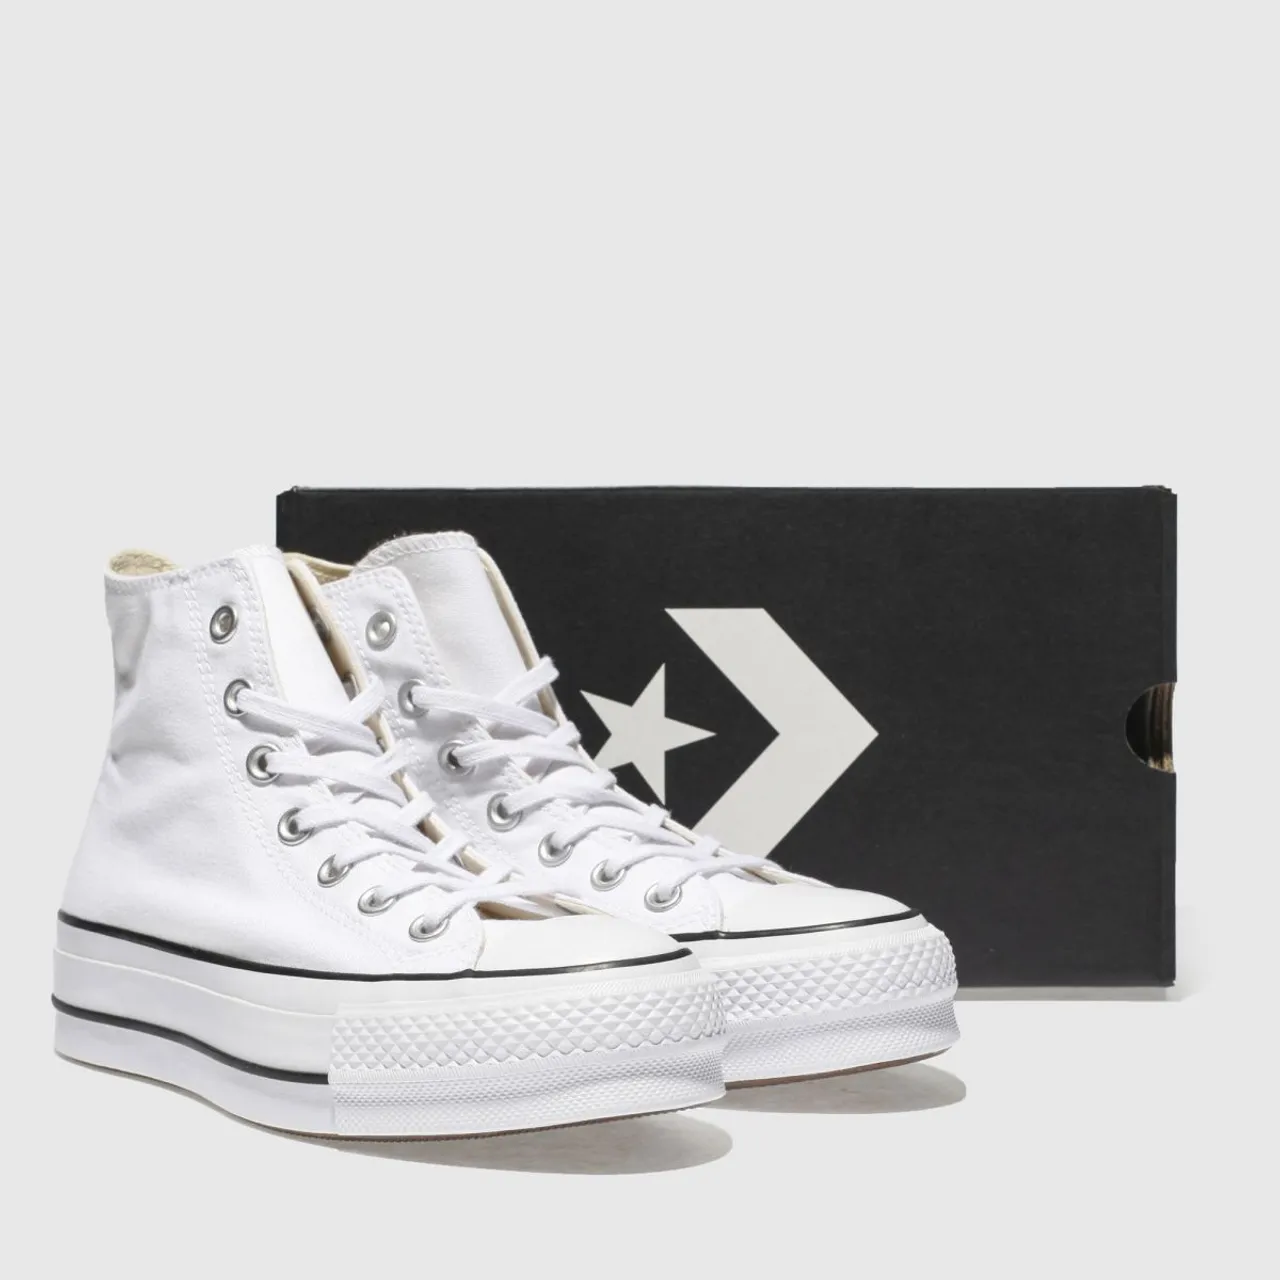 Converse All Star Lift Hi Trainers In White